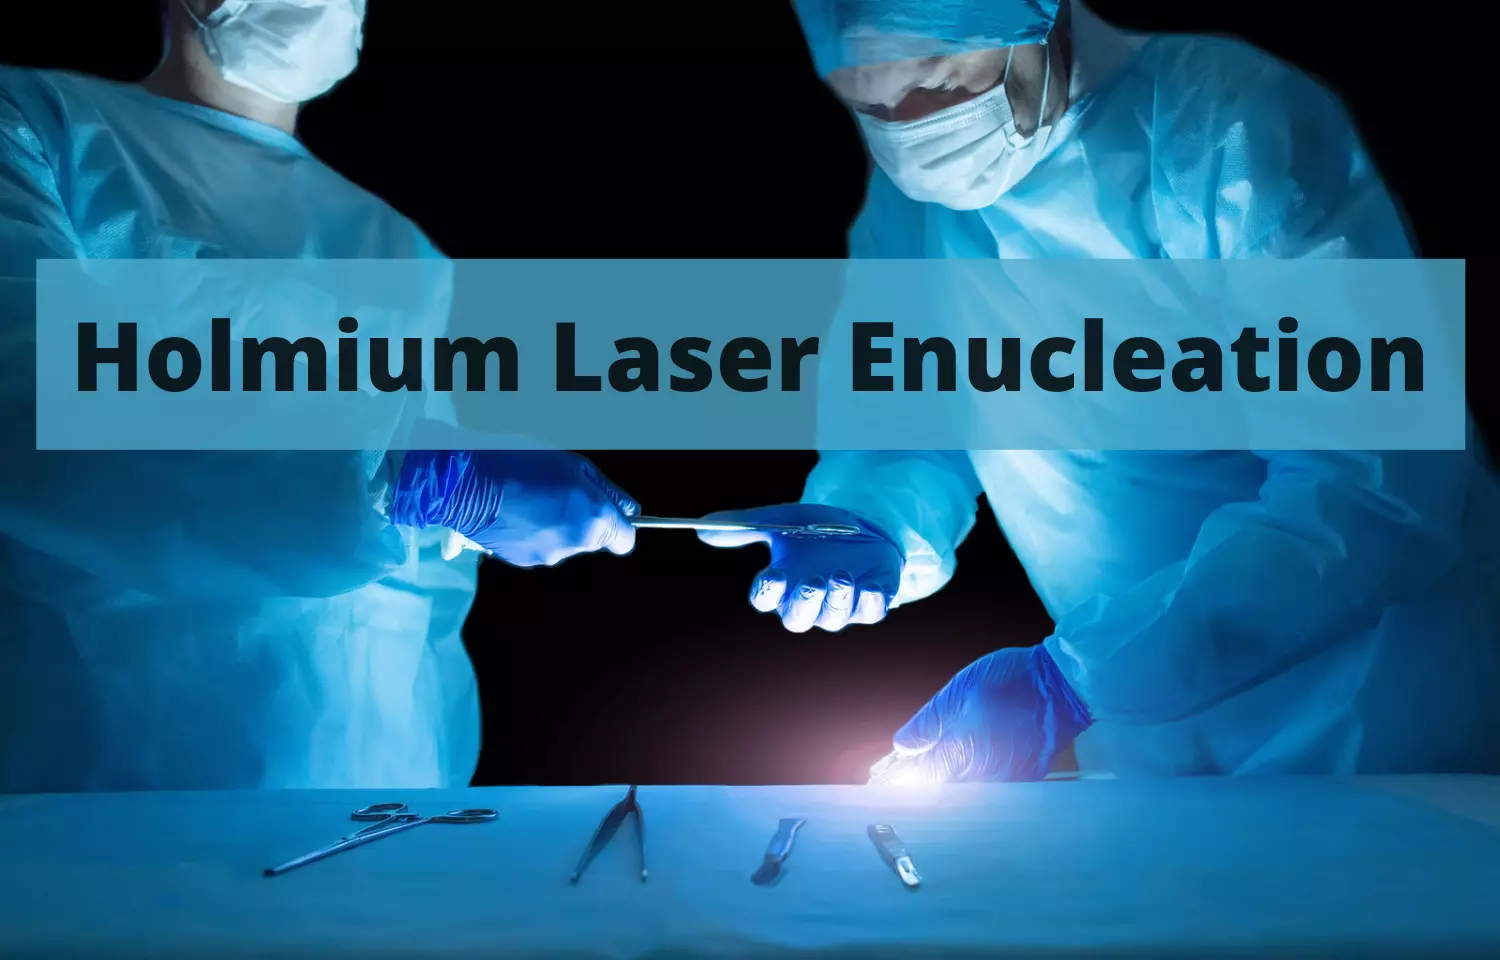 Same-day discharge after holmium laser enucleation facilitated by medical support teams